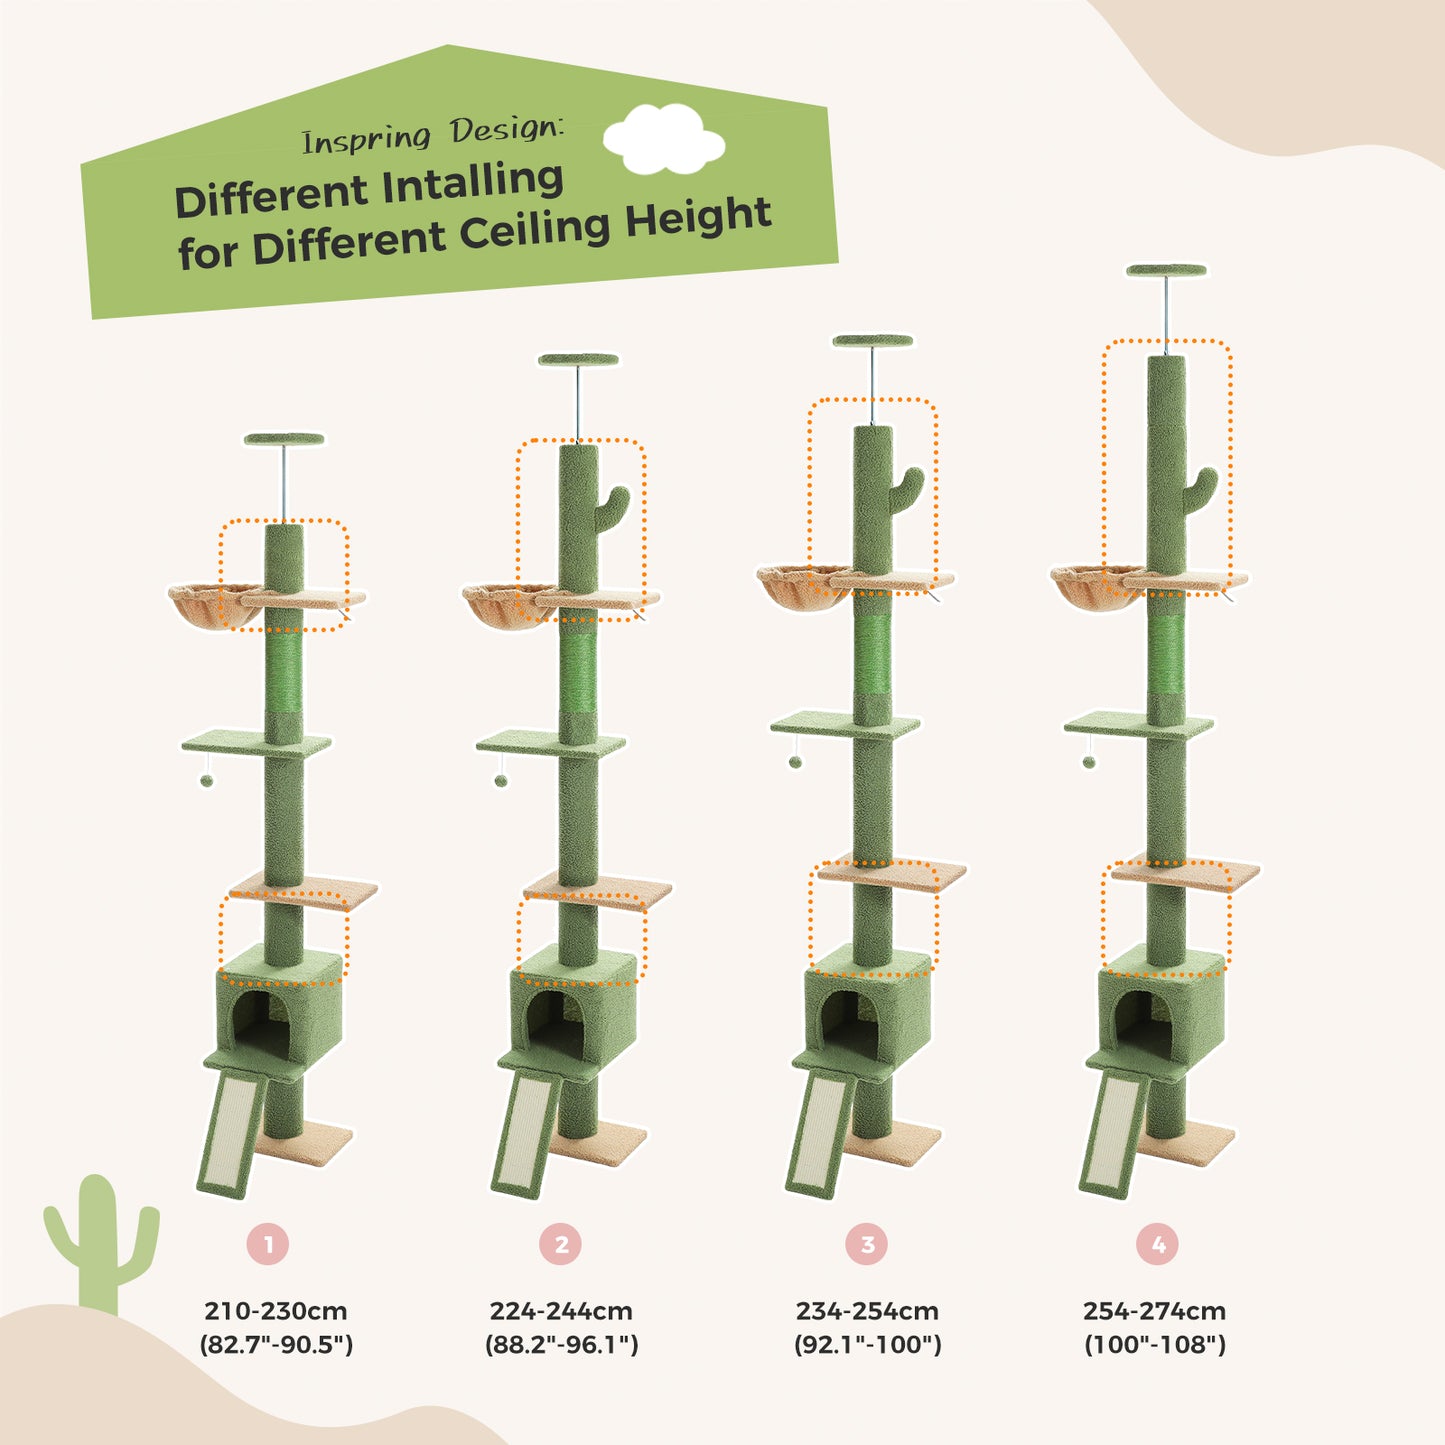 PAWZ Road Cat Tree Tower Scratching Post Ceiling High Cat Scratcher Condo Beds Green